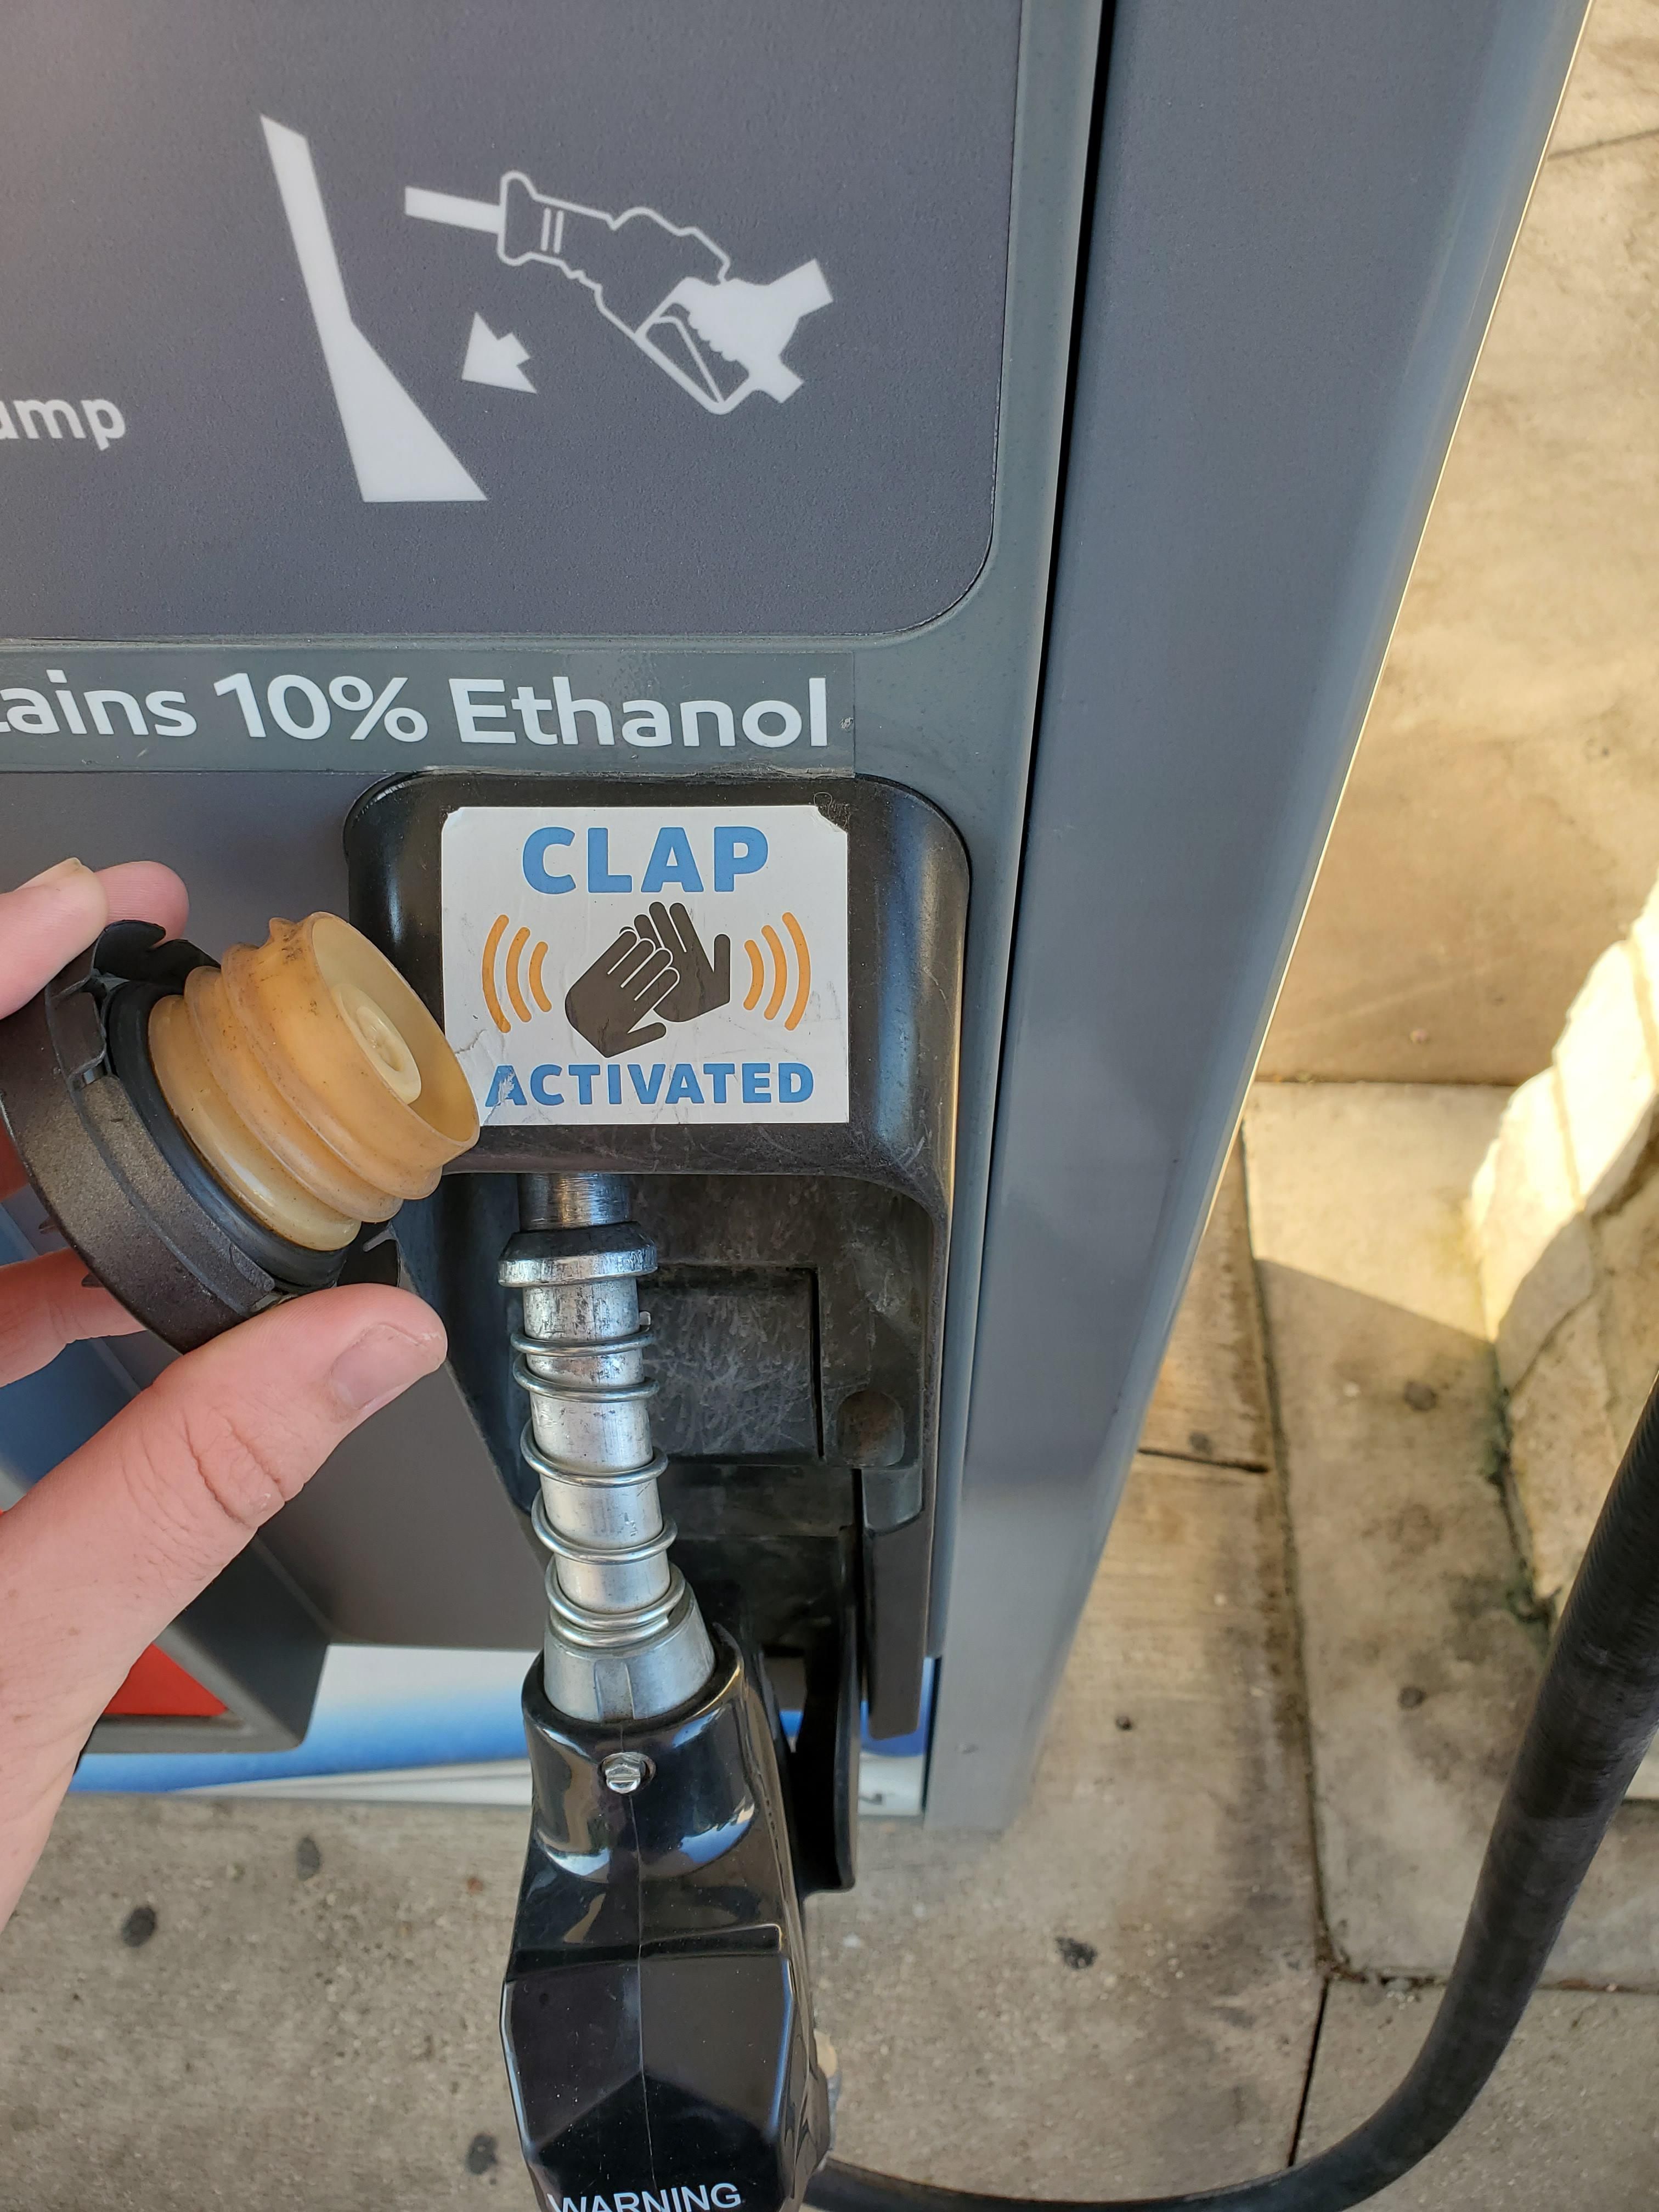 This sticker someone put on the gas pump